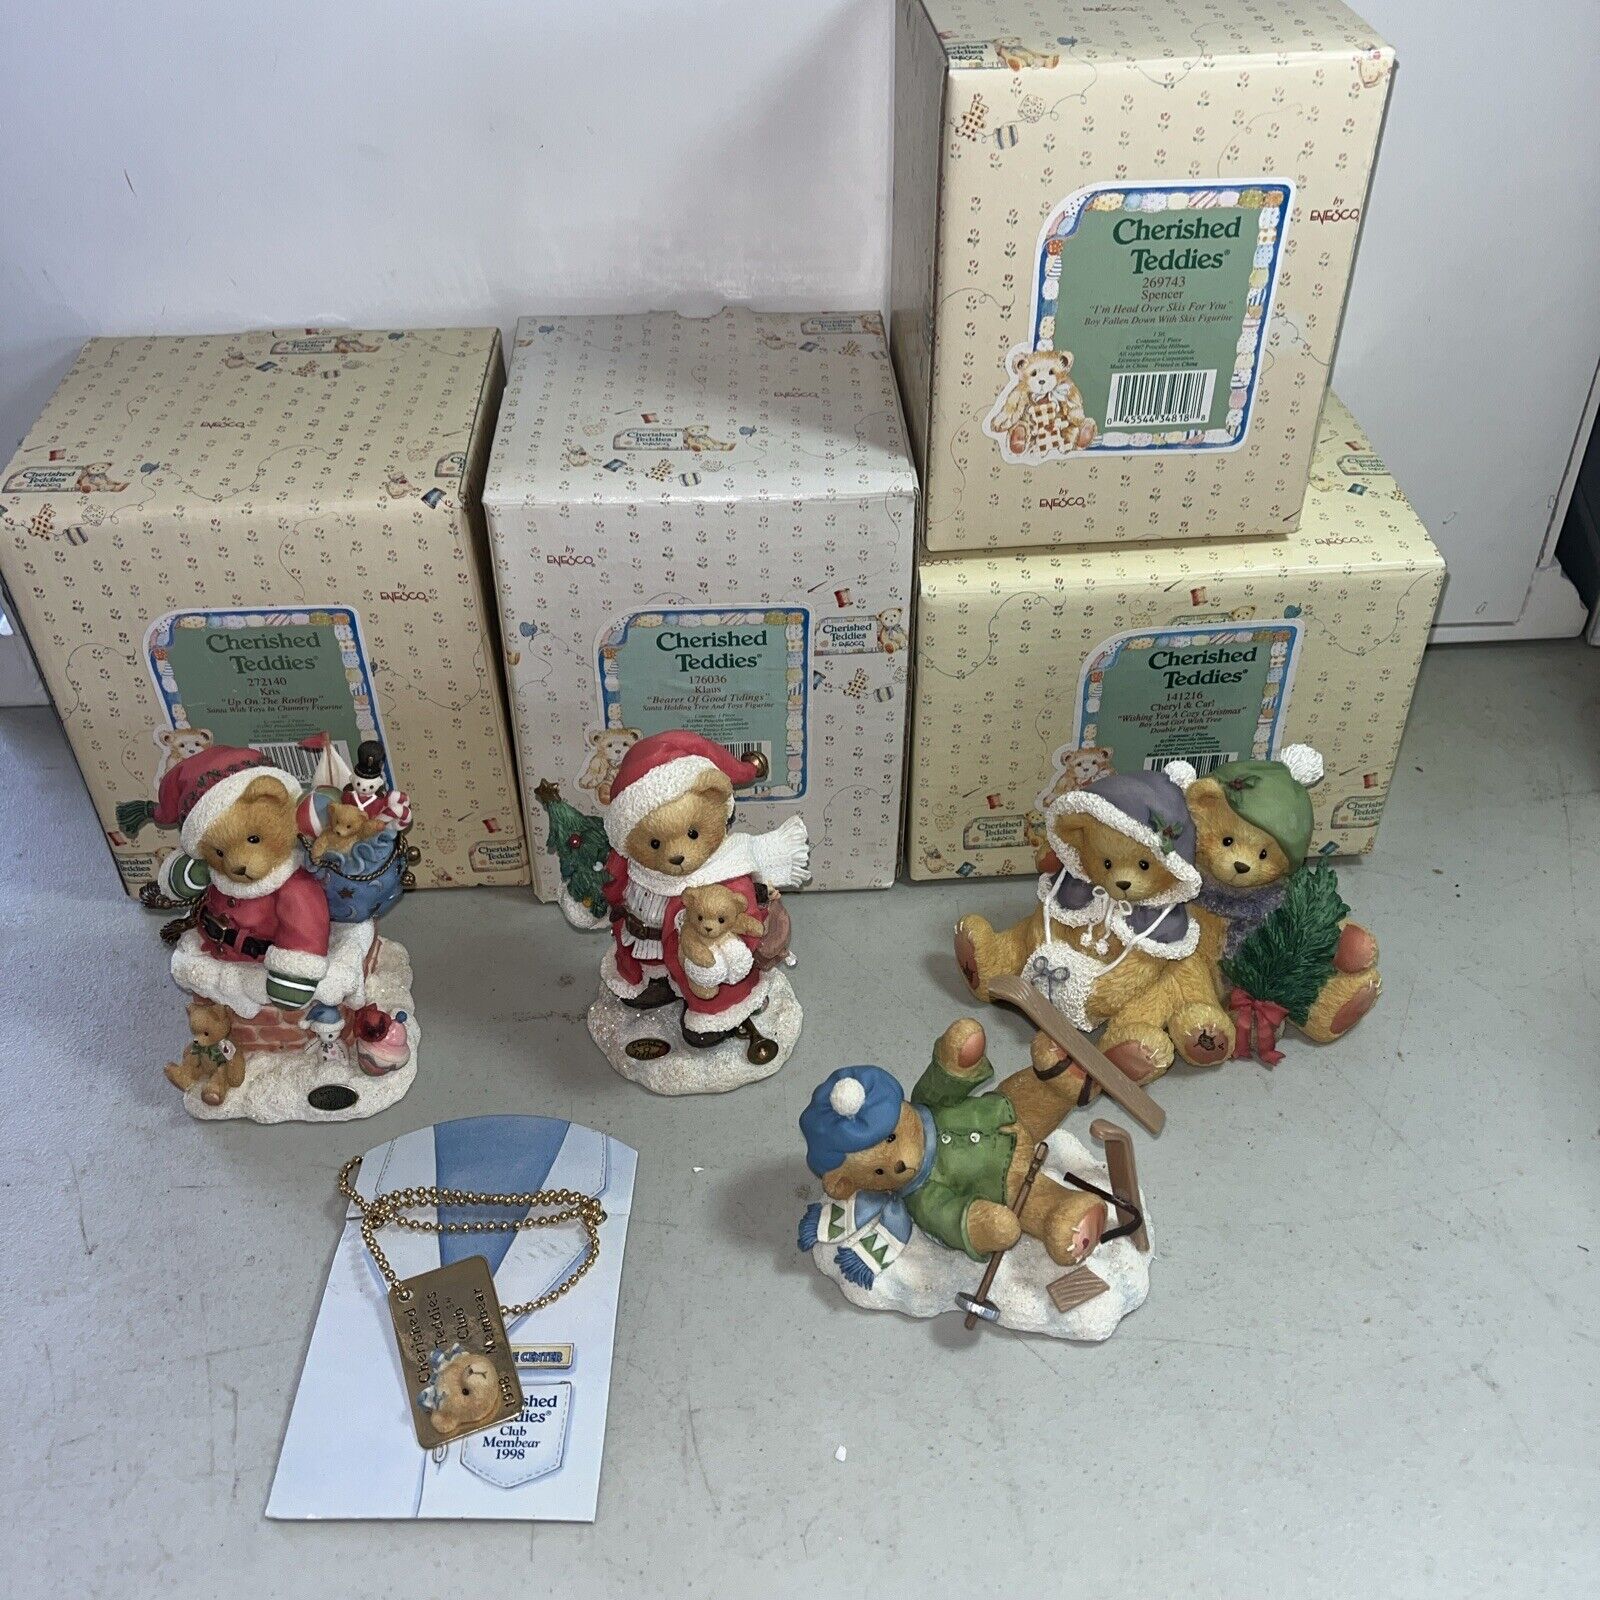 Lot Of 4 cherished teddies figurines Christmas Holiday With Key Chain